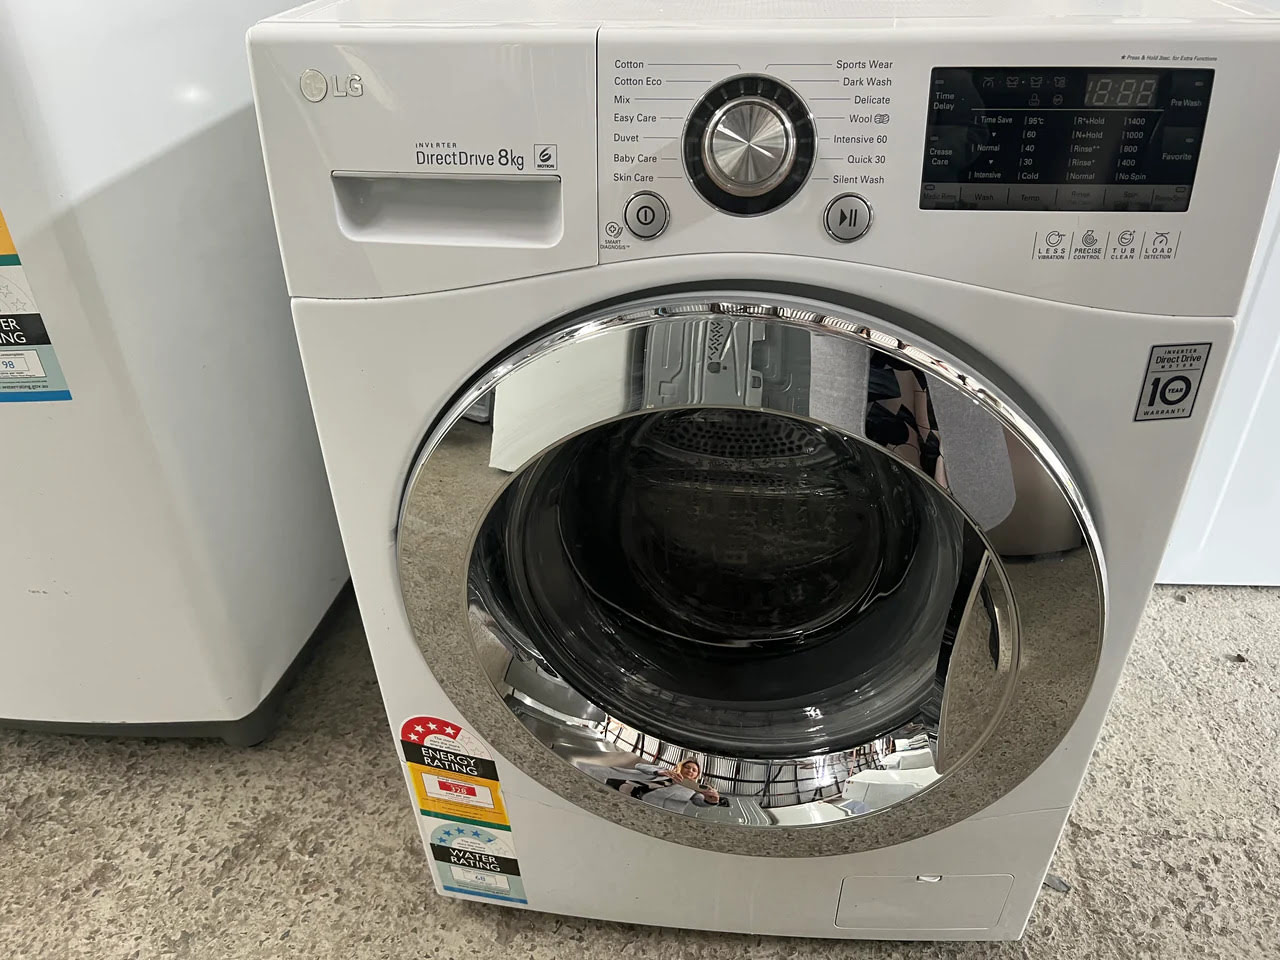 How To Fix The Error Code Ub Or Ur For LG Washing Machine